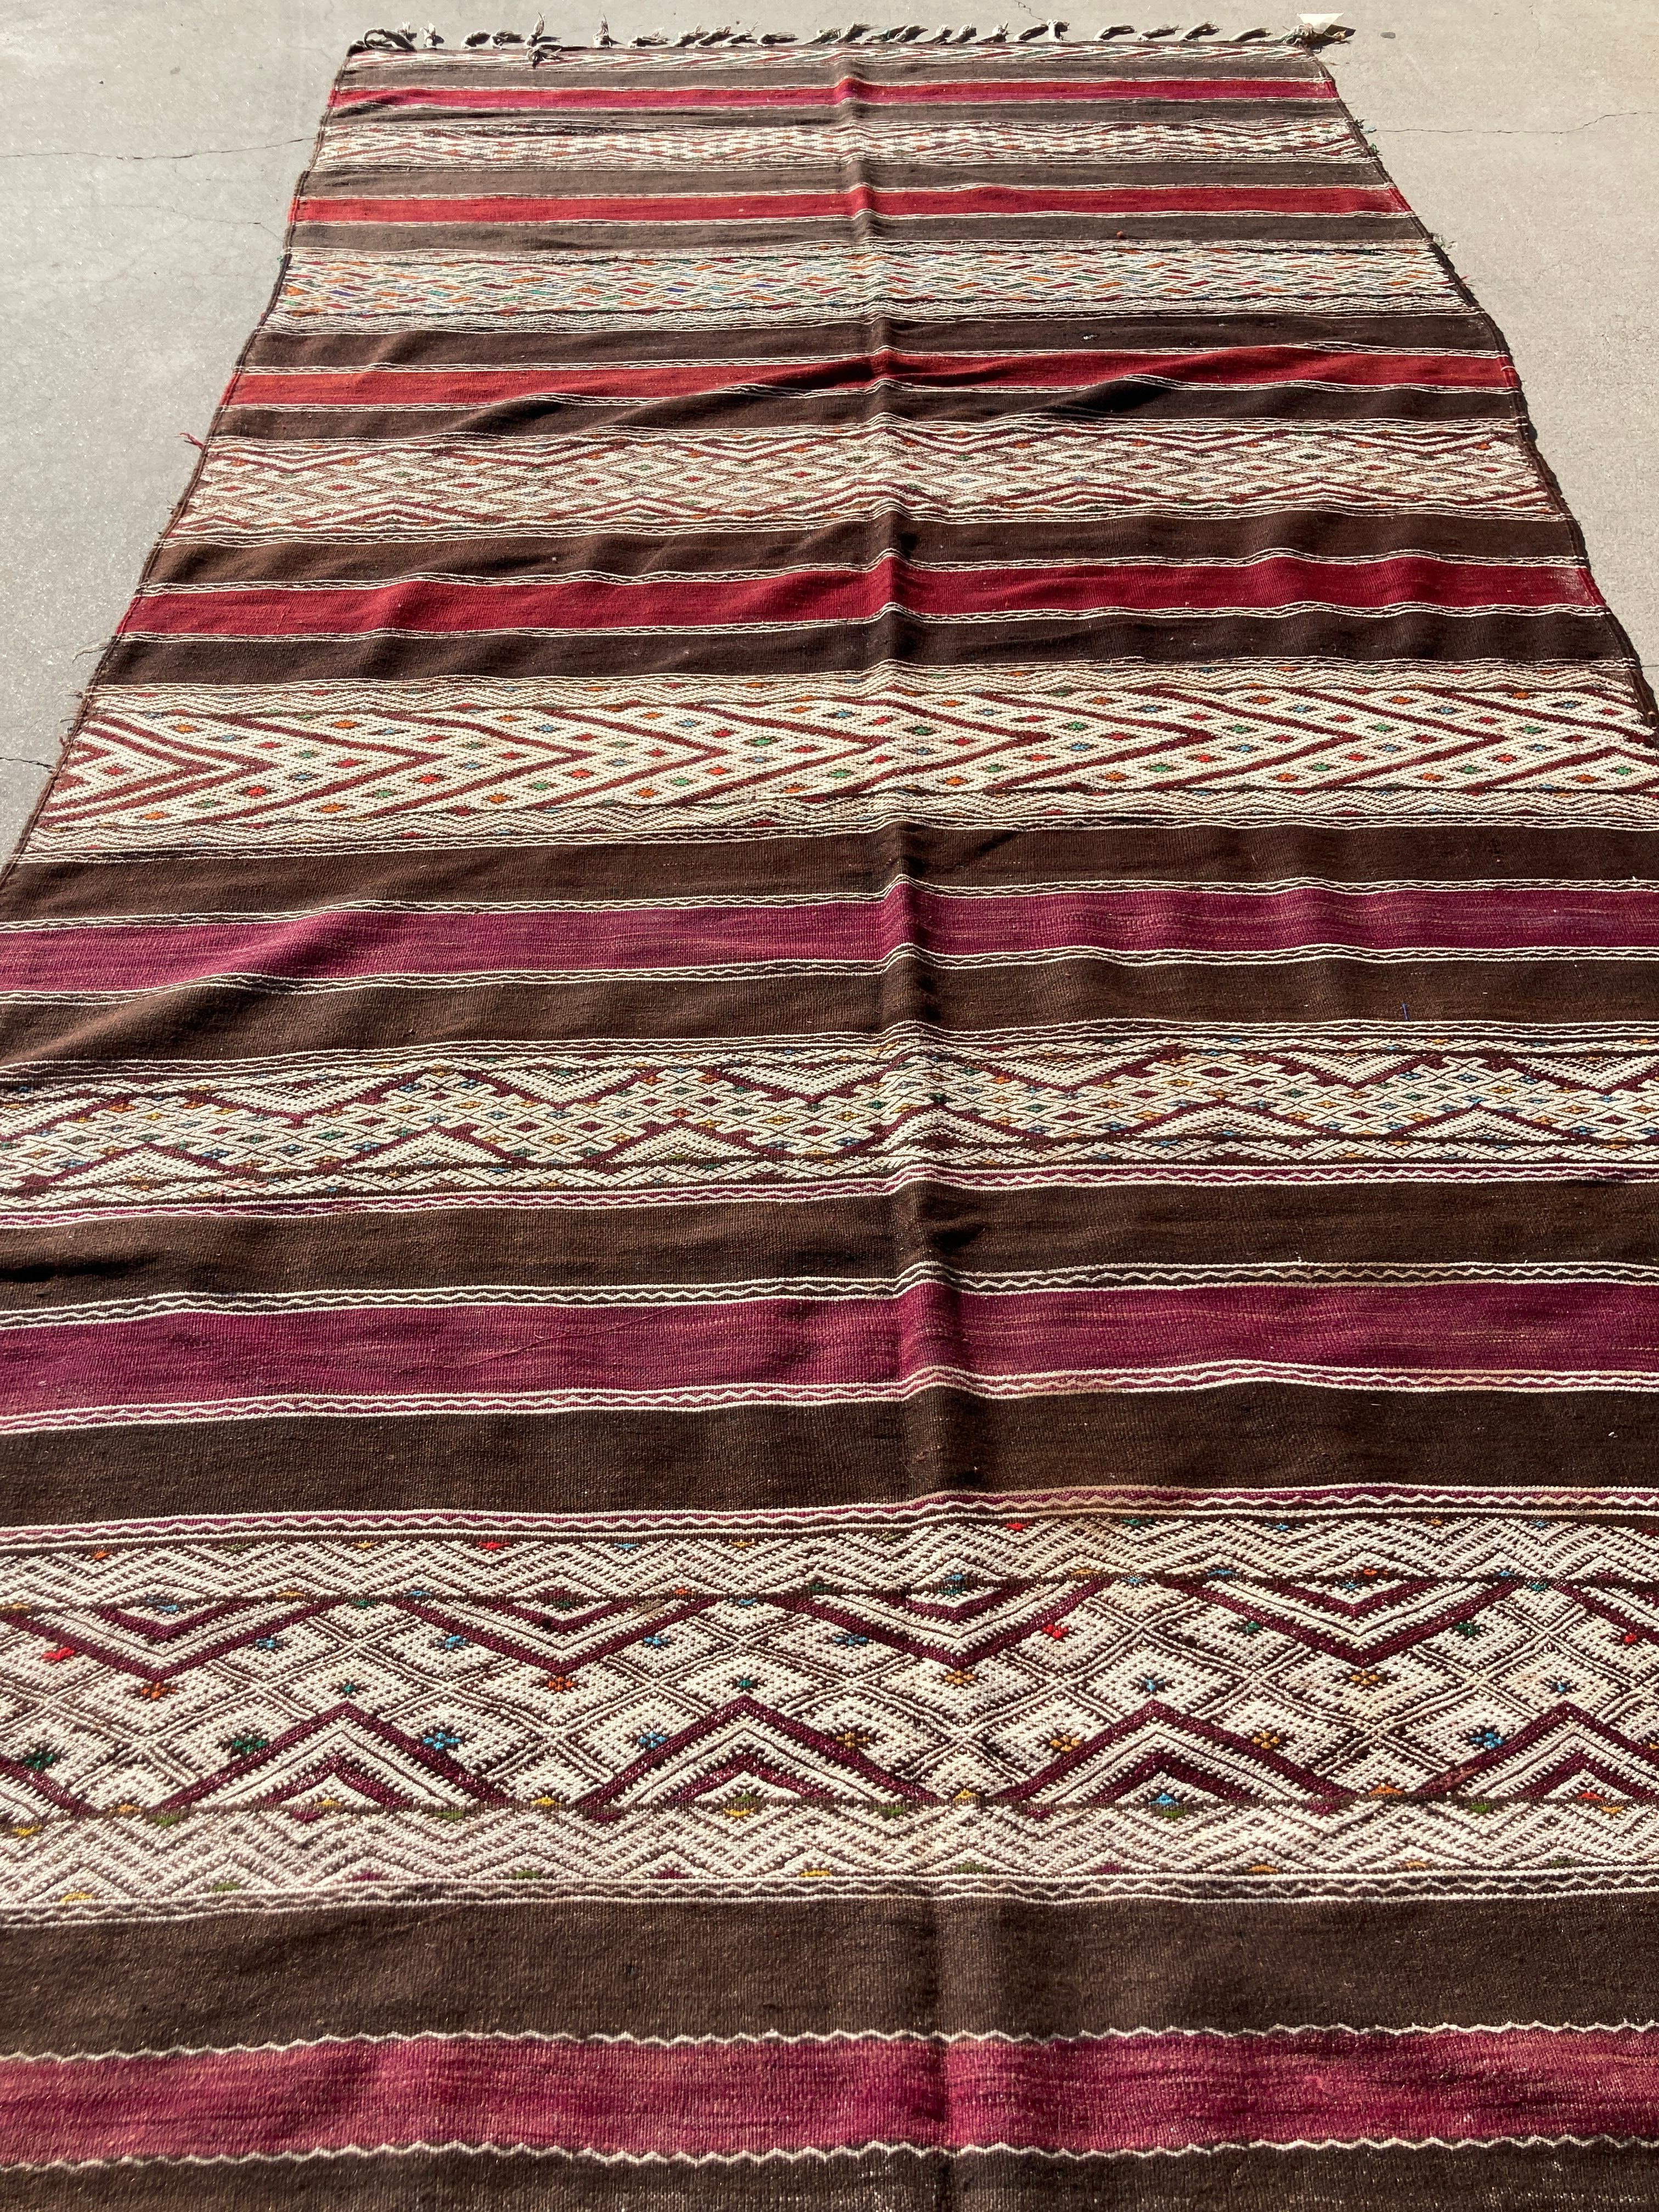 Moroccan Vintage Tribal Kilim Rug Textile North Africa In Good Condition For Sale In North Hollywood, CA